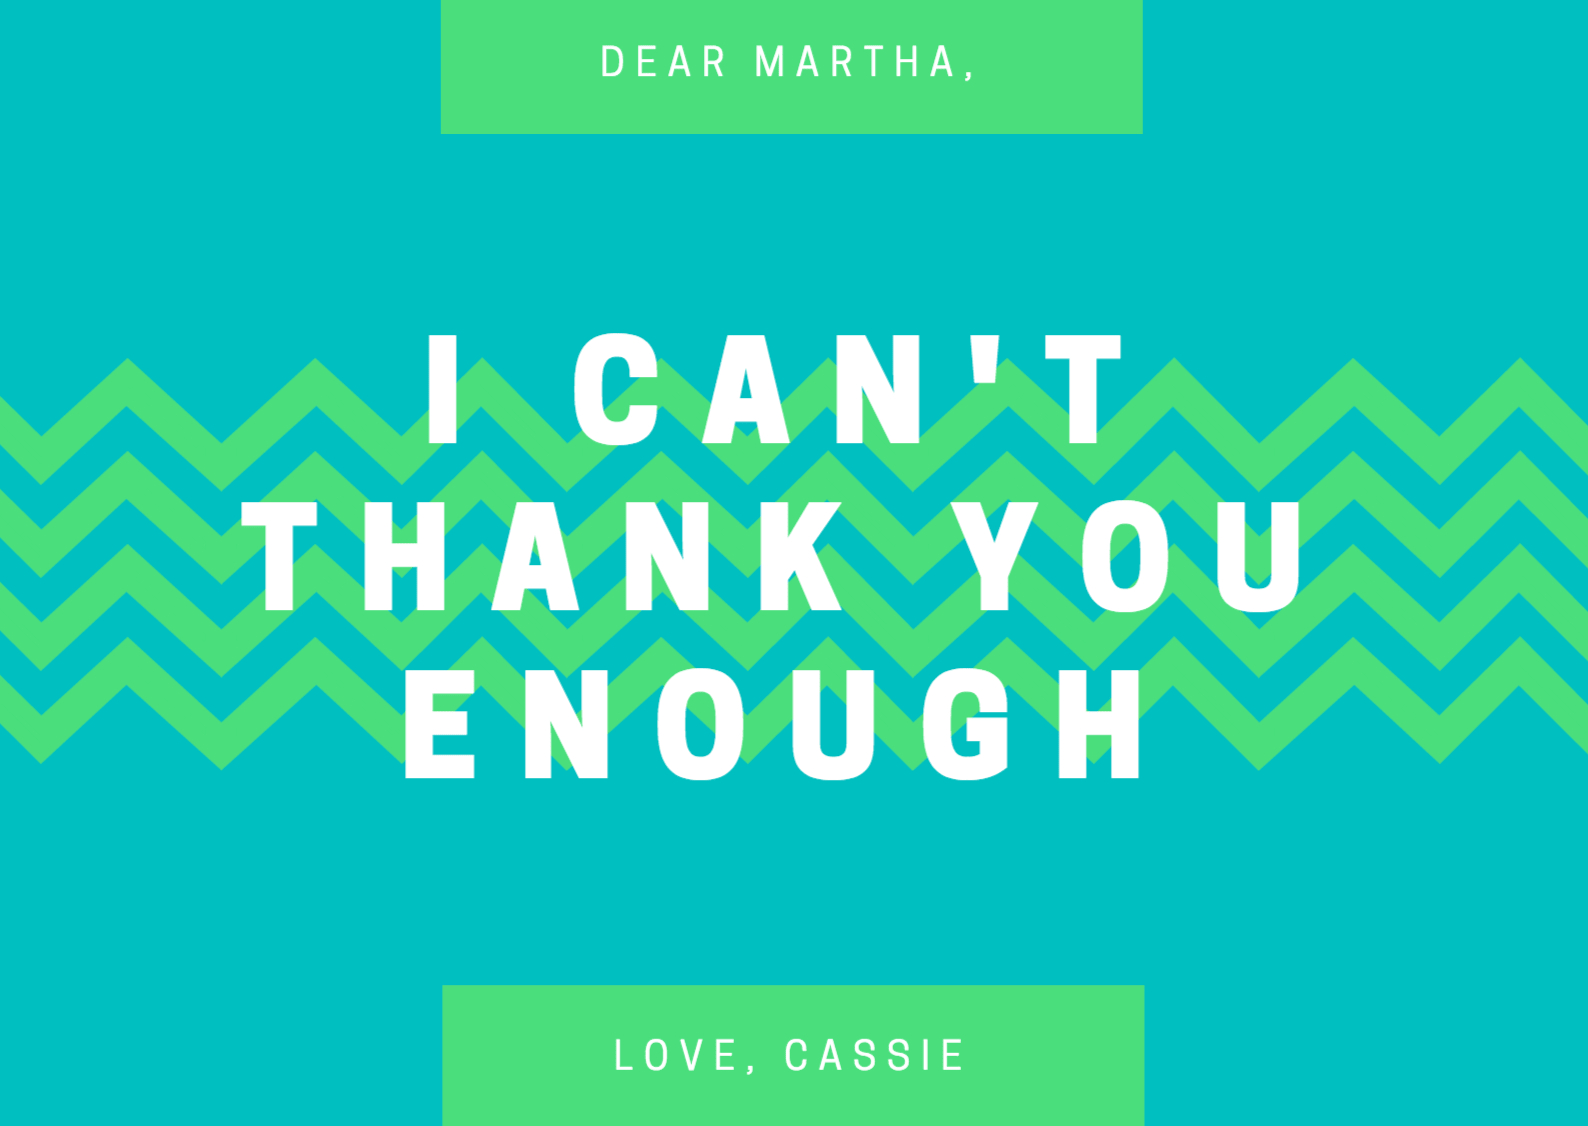 Design A Custom Thank You Card - Canva - Free Personalized Thank You Cards Printable